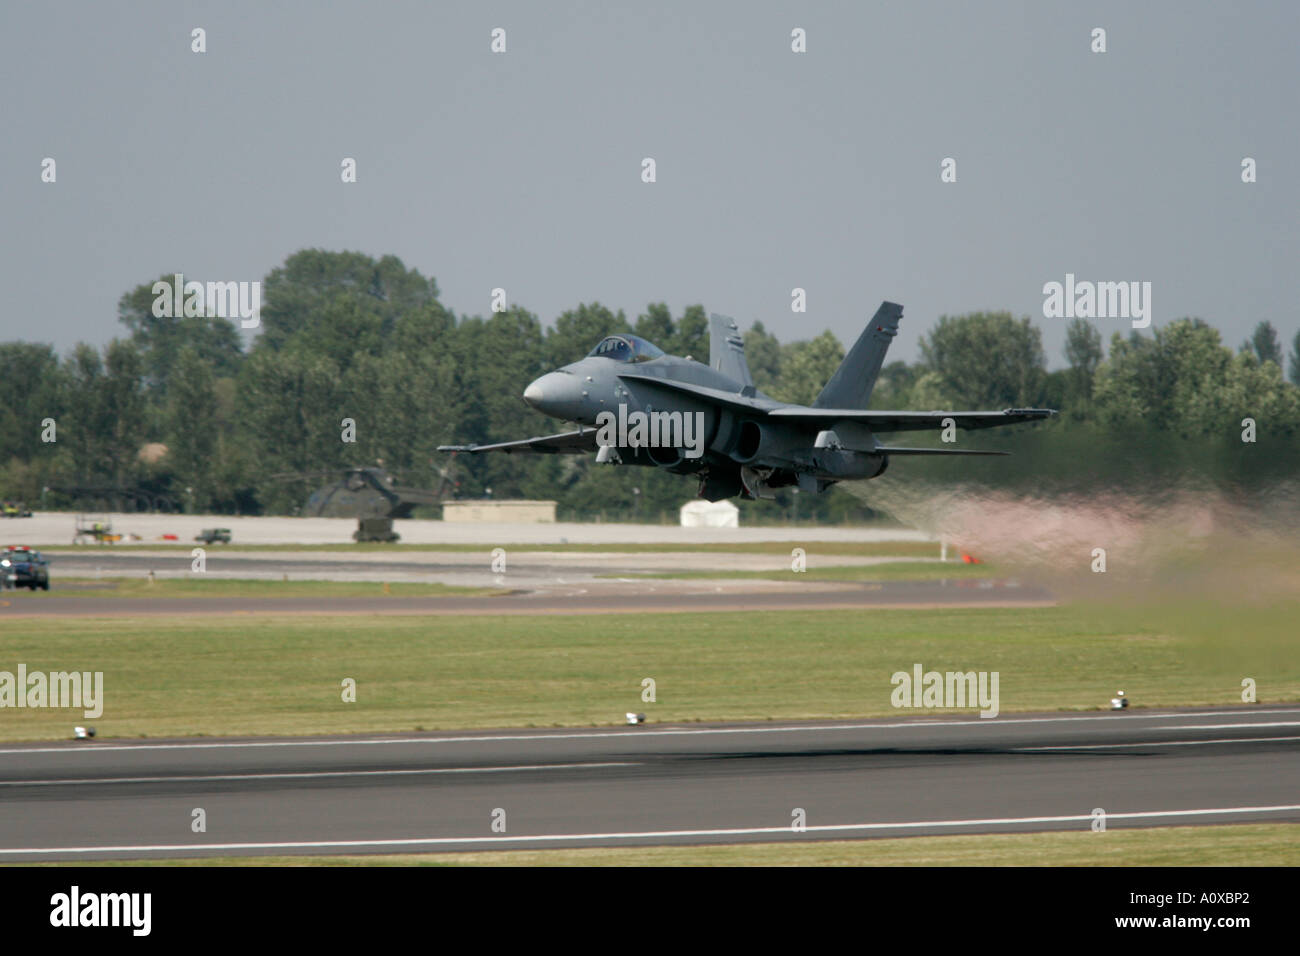 Finnish AF F 18C Hornet takes off from runway with full afterburner and jet wash RIAT 2005 RAF Fairford Stock Photo